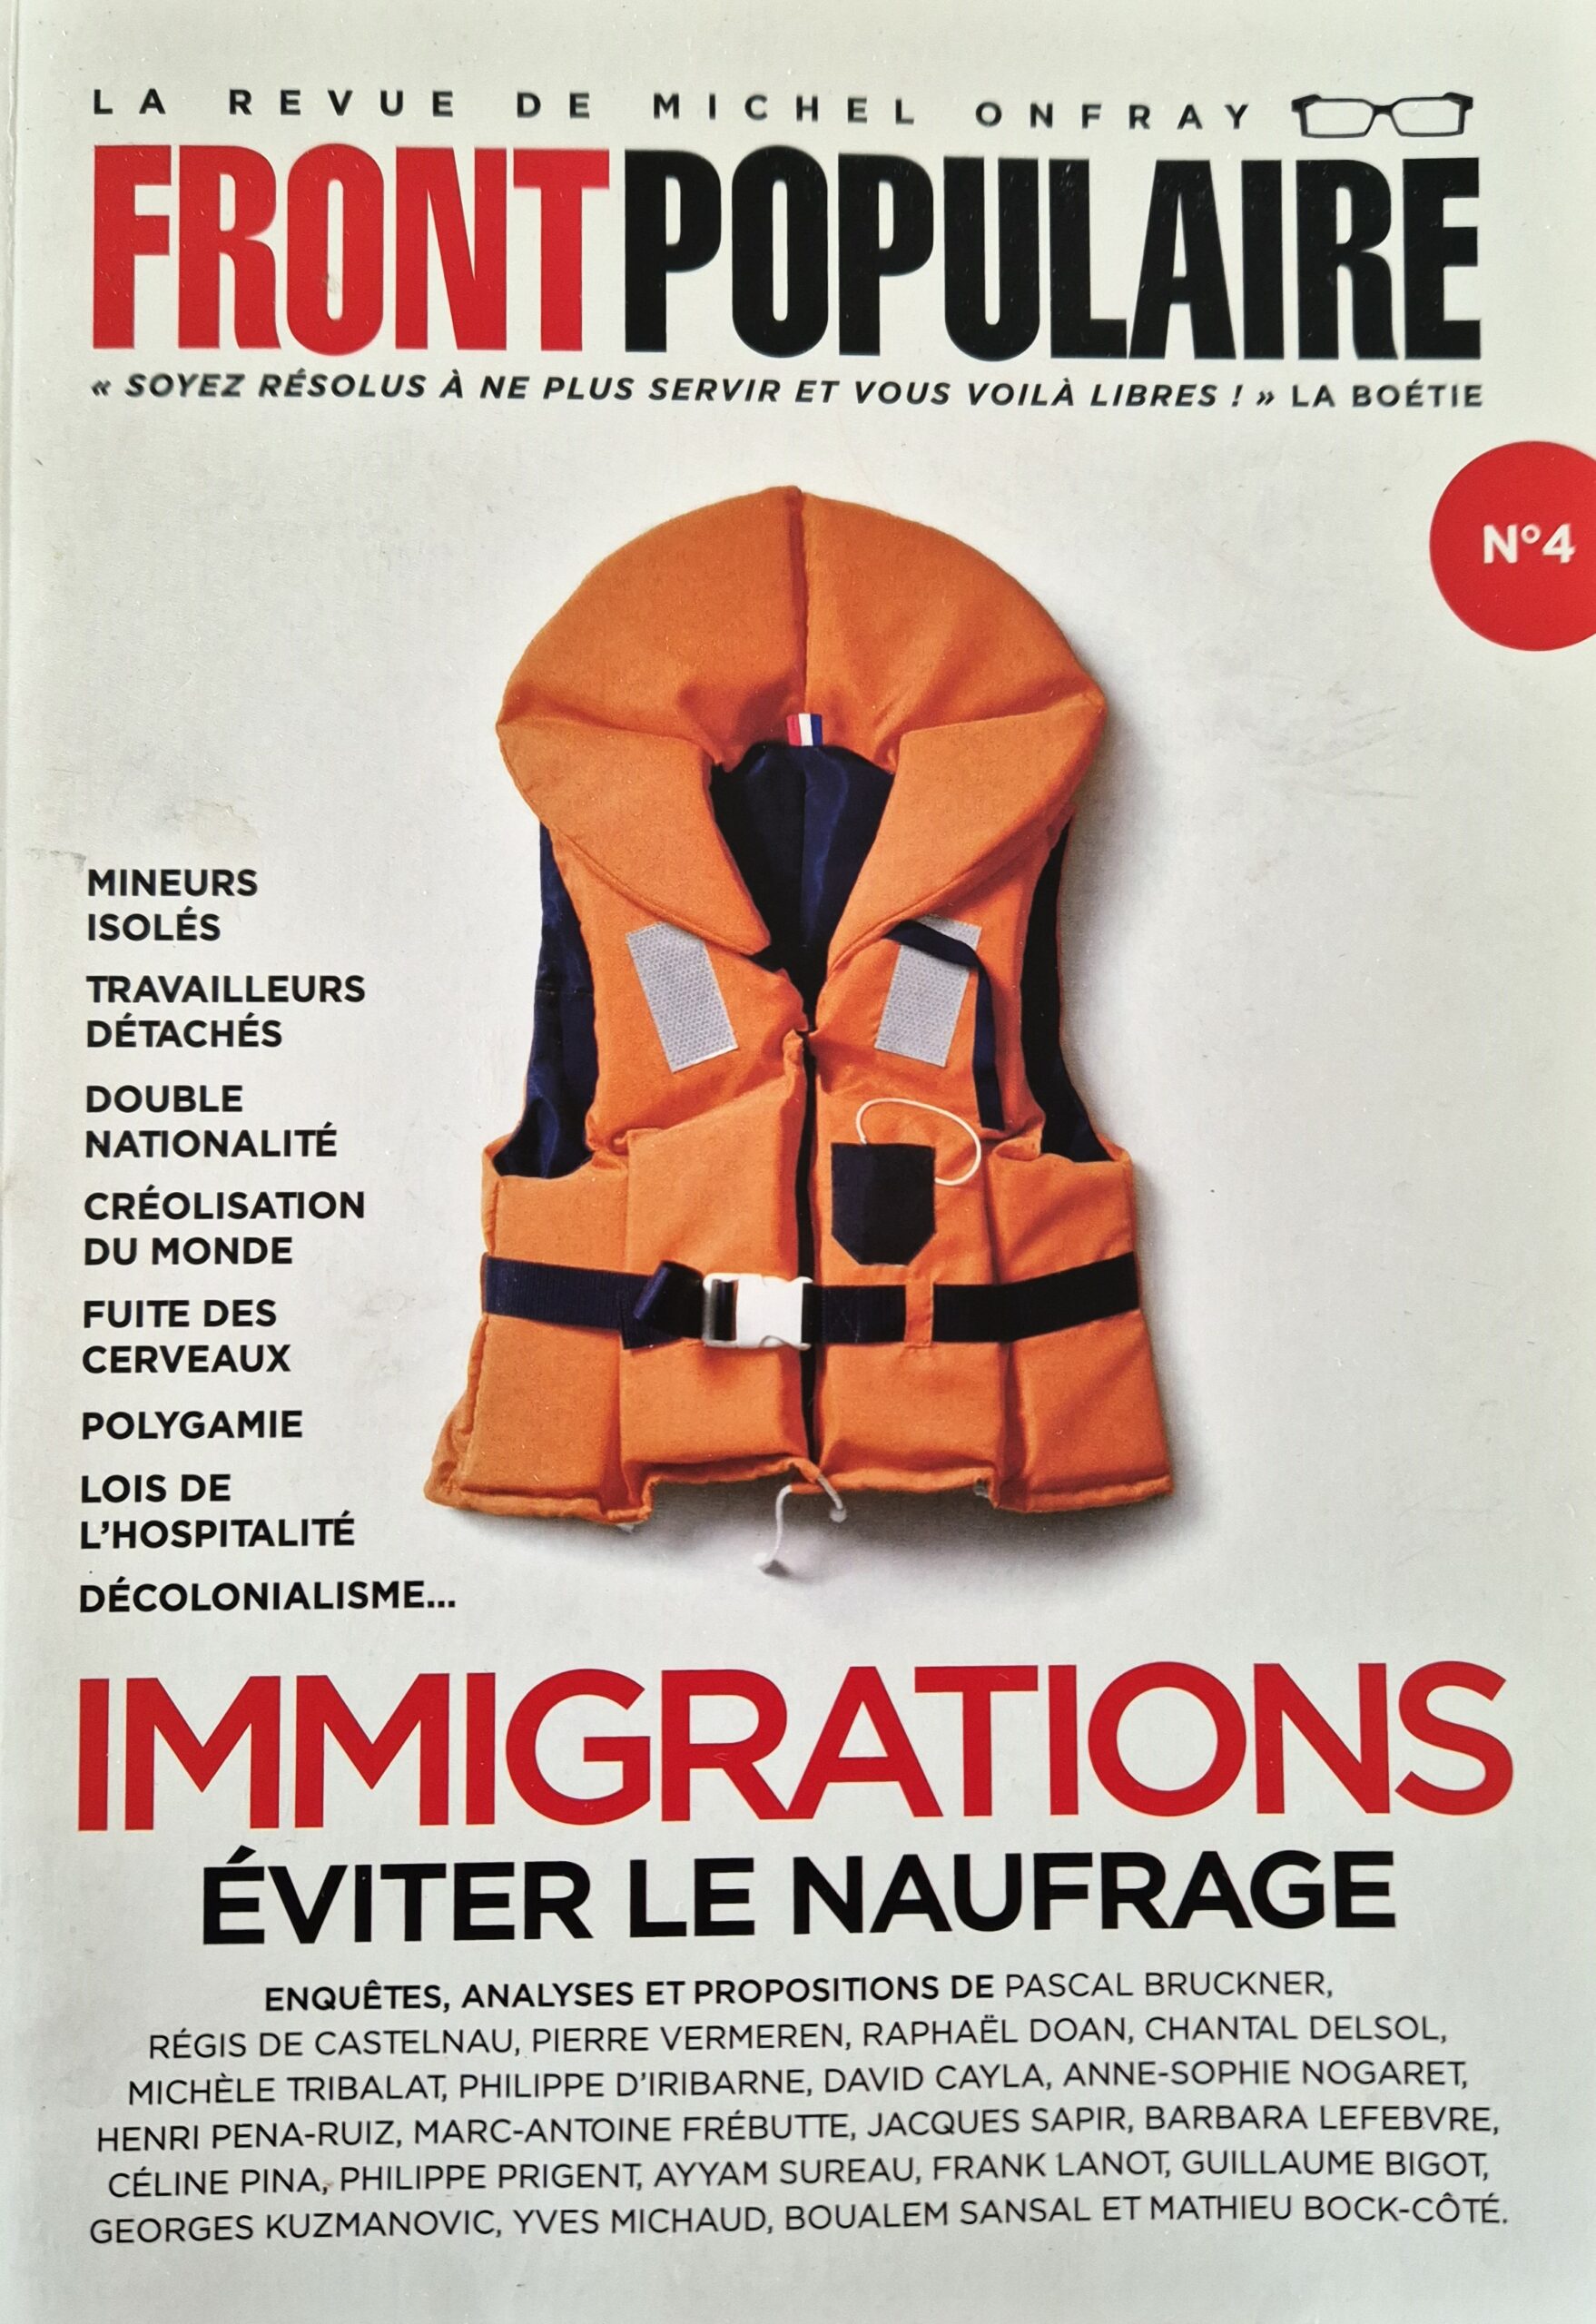 ONFRAY Michel, ‘Immigrations – éviter le naufrage (FRONT-POPULAIRE n°4)’